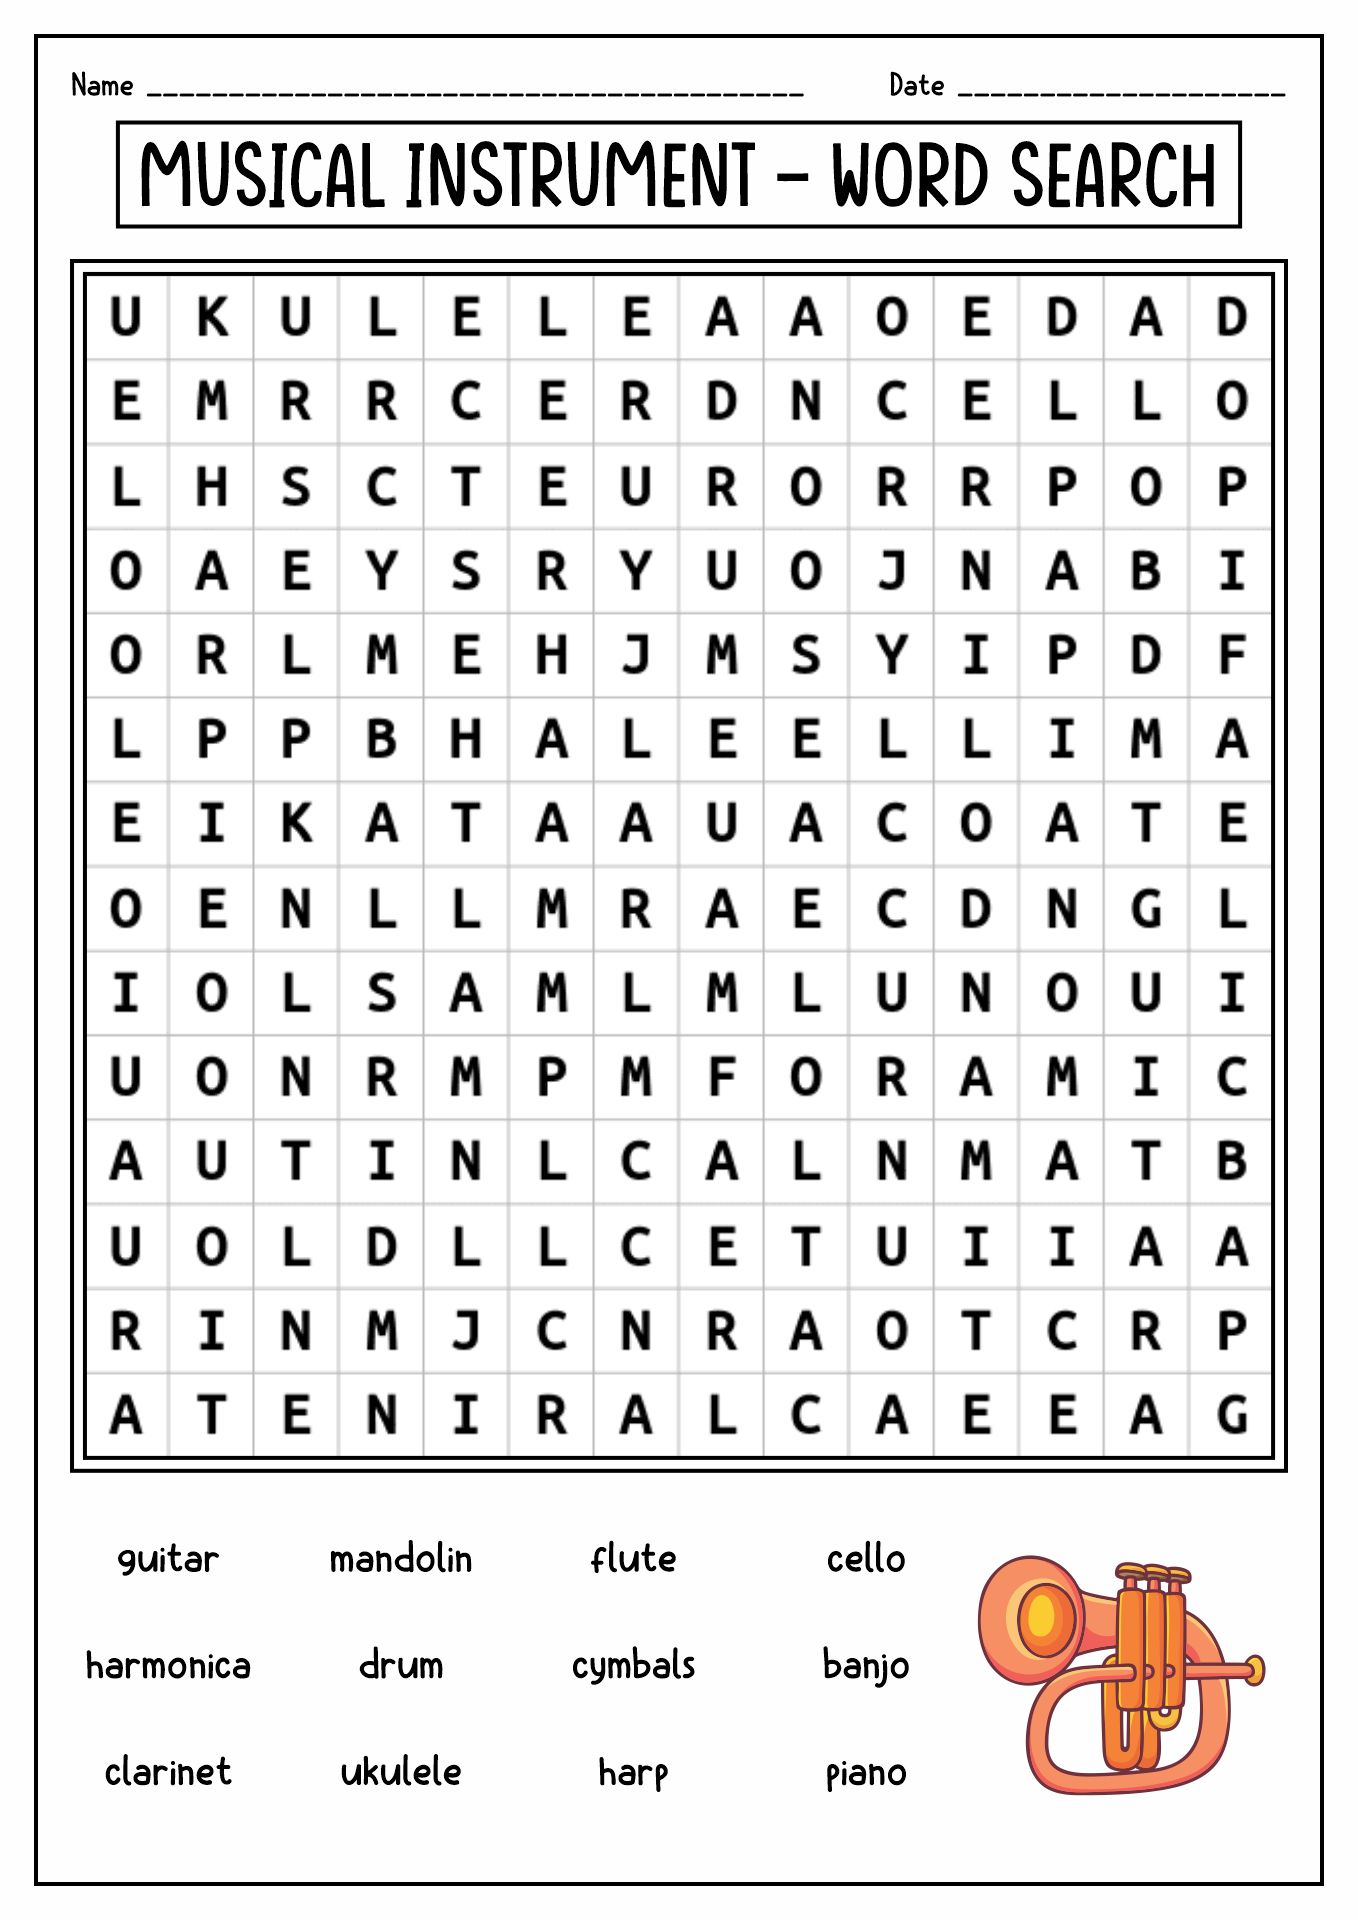 Musical Instruments Word Search Puzzle Image